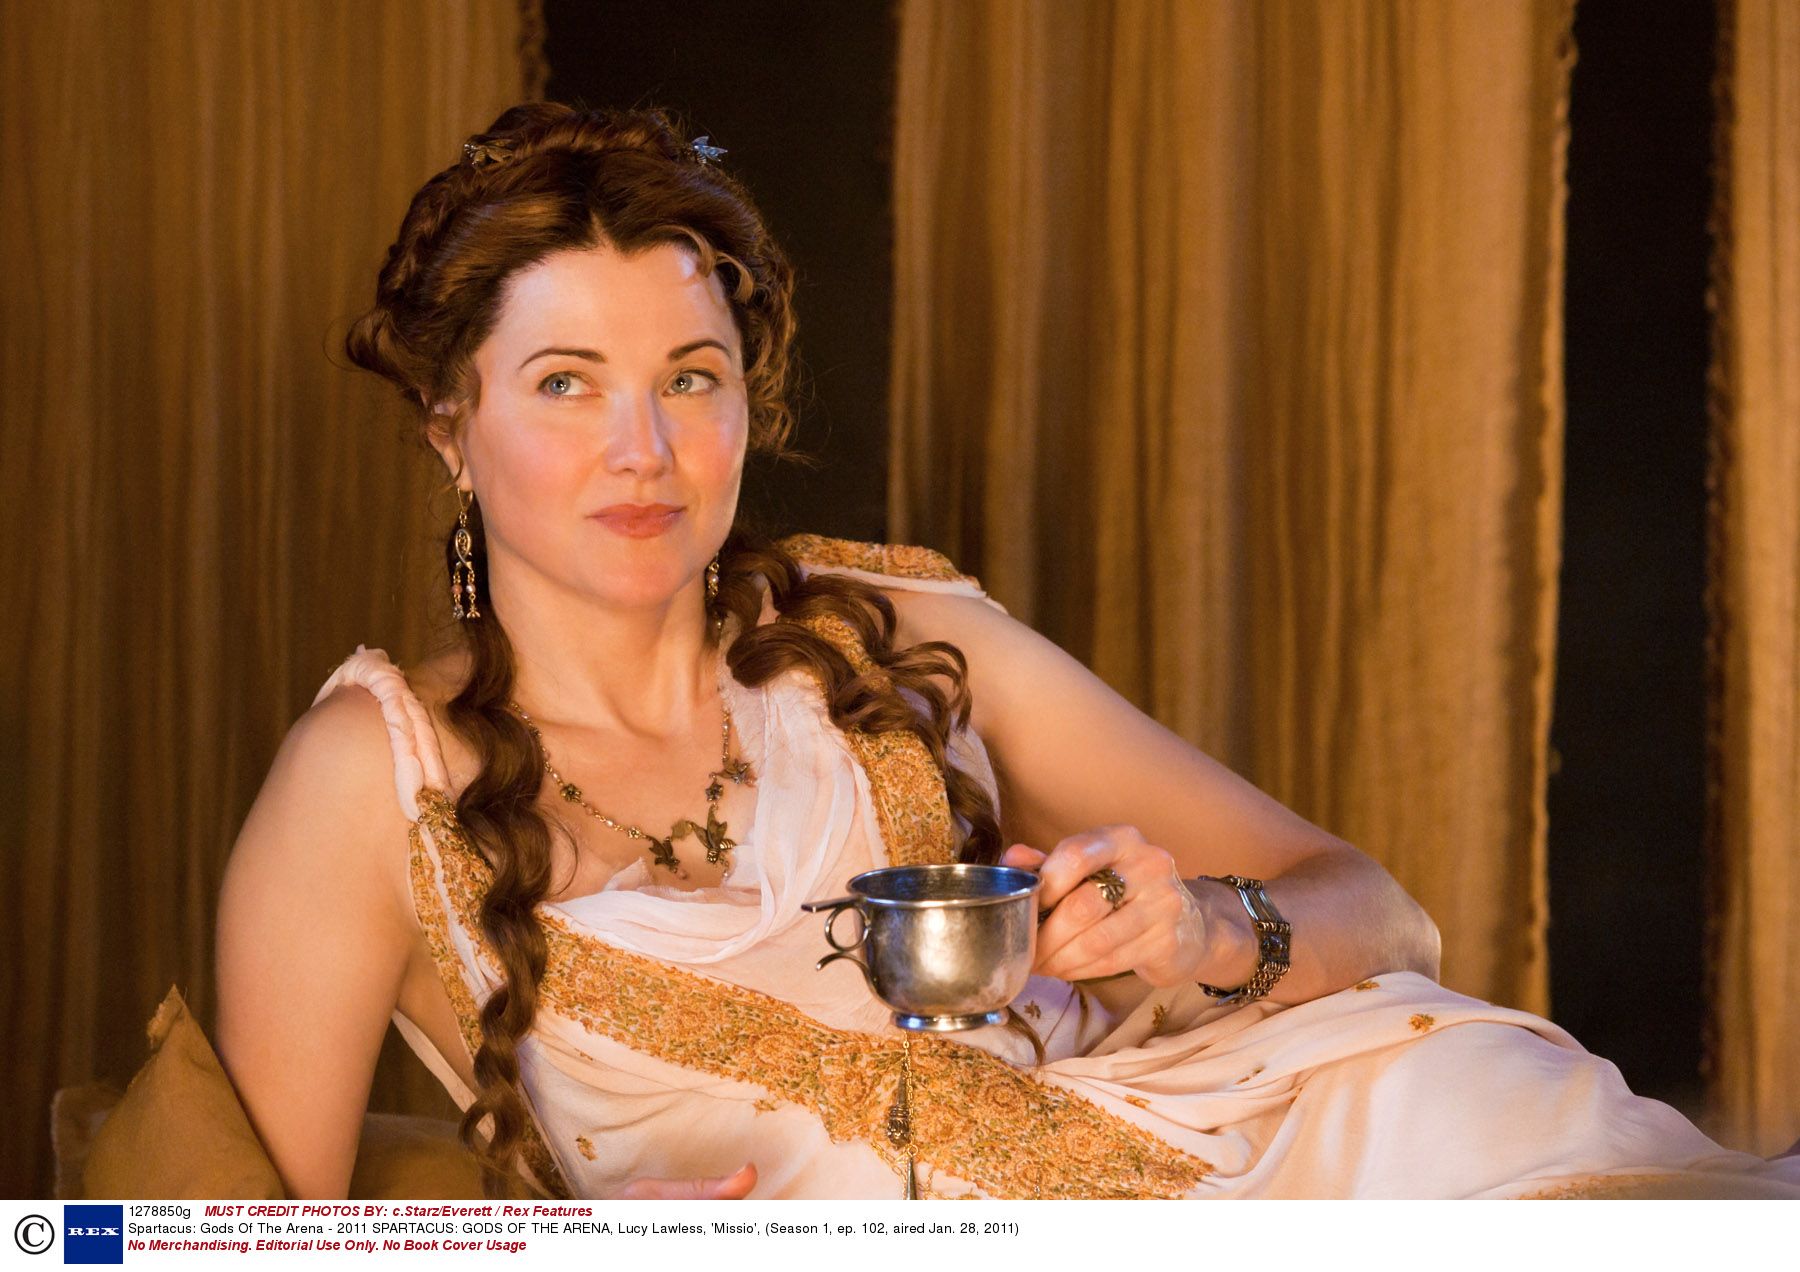 Lucy lawless spartacus pics